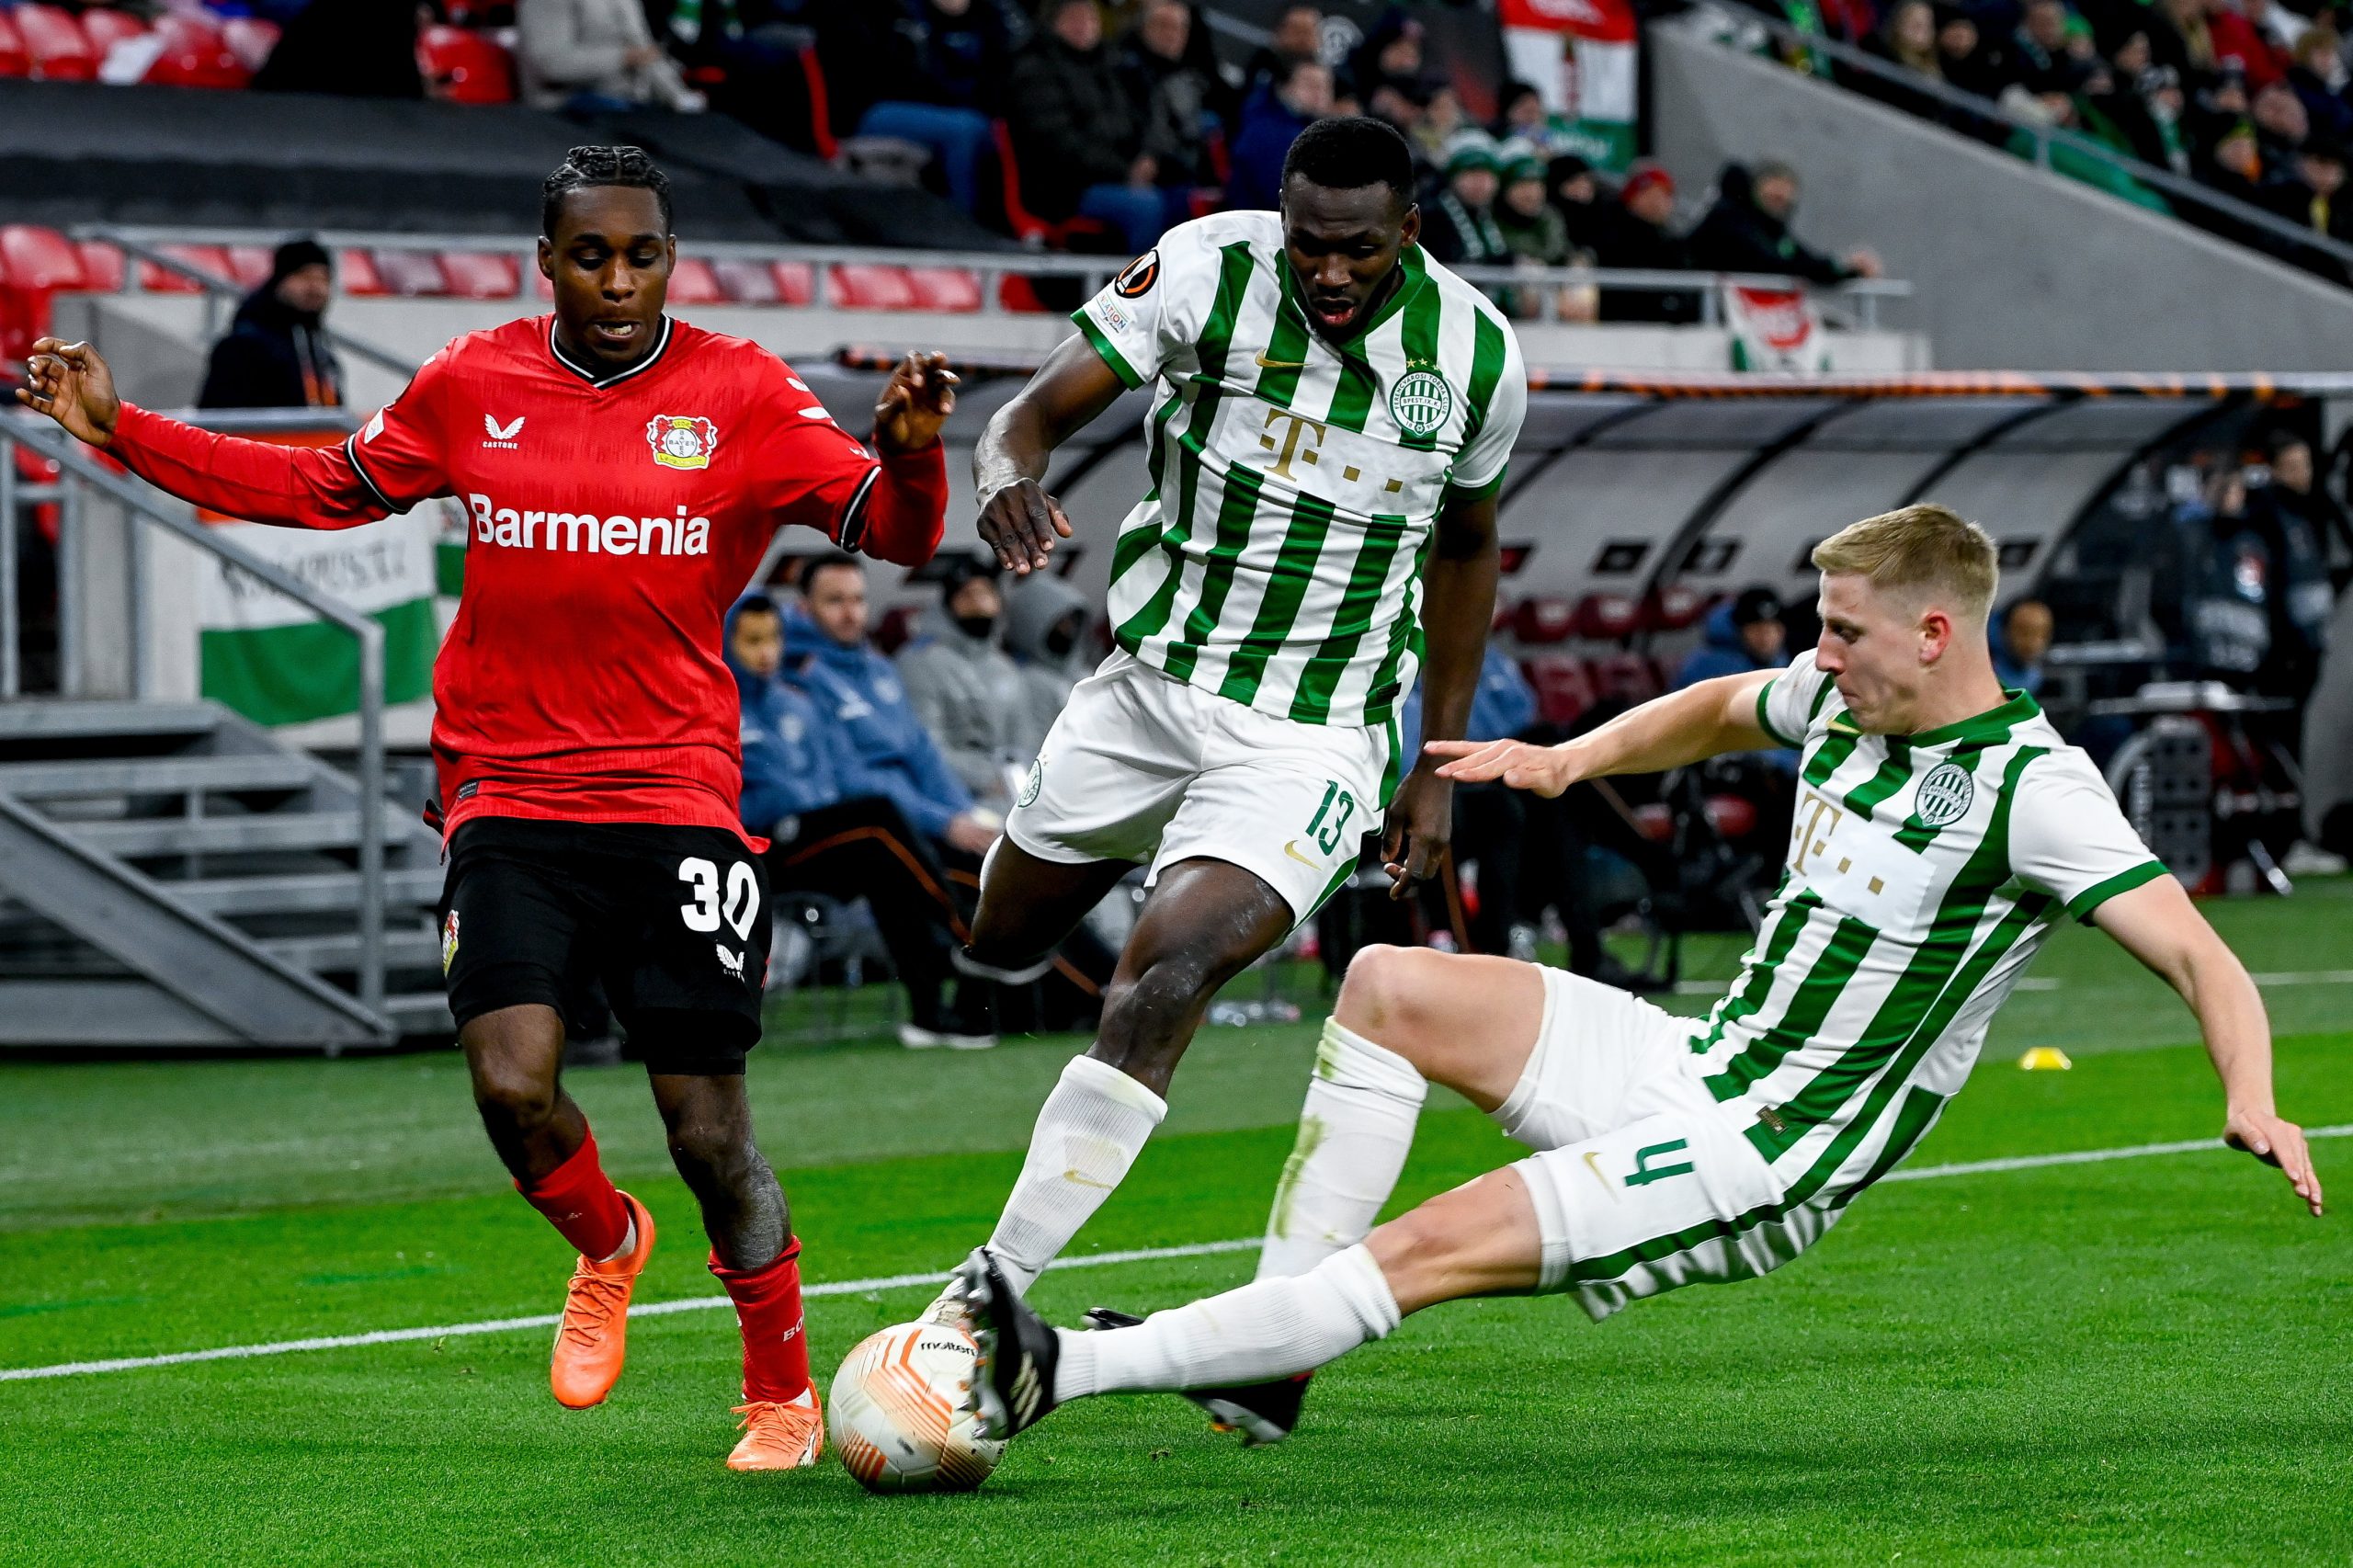 Ferencváros overwhelm Videoton to end cup drought